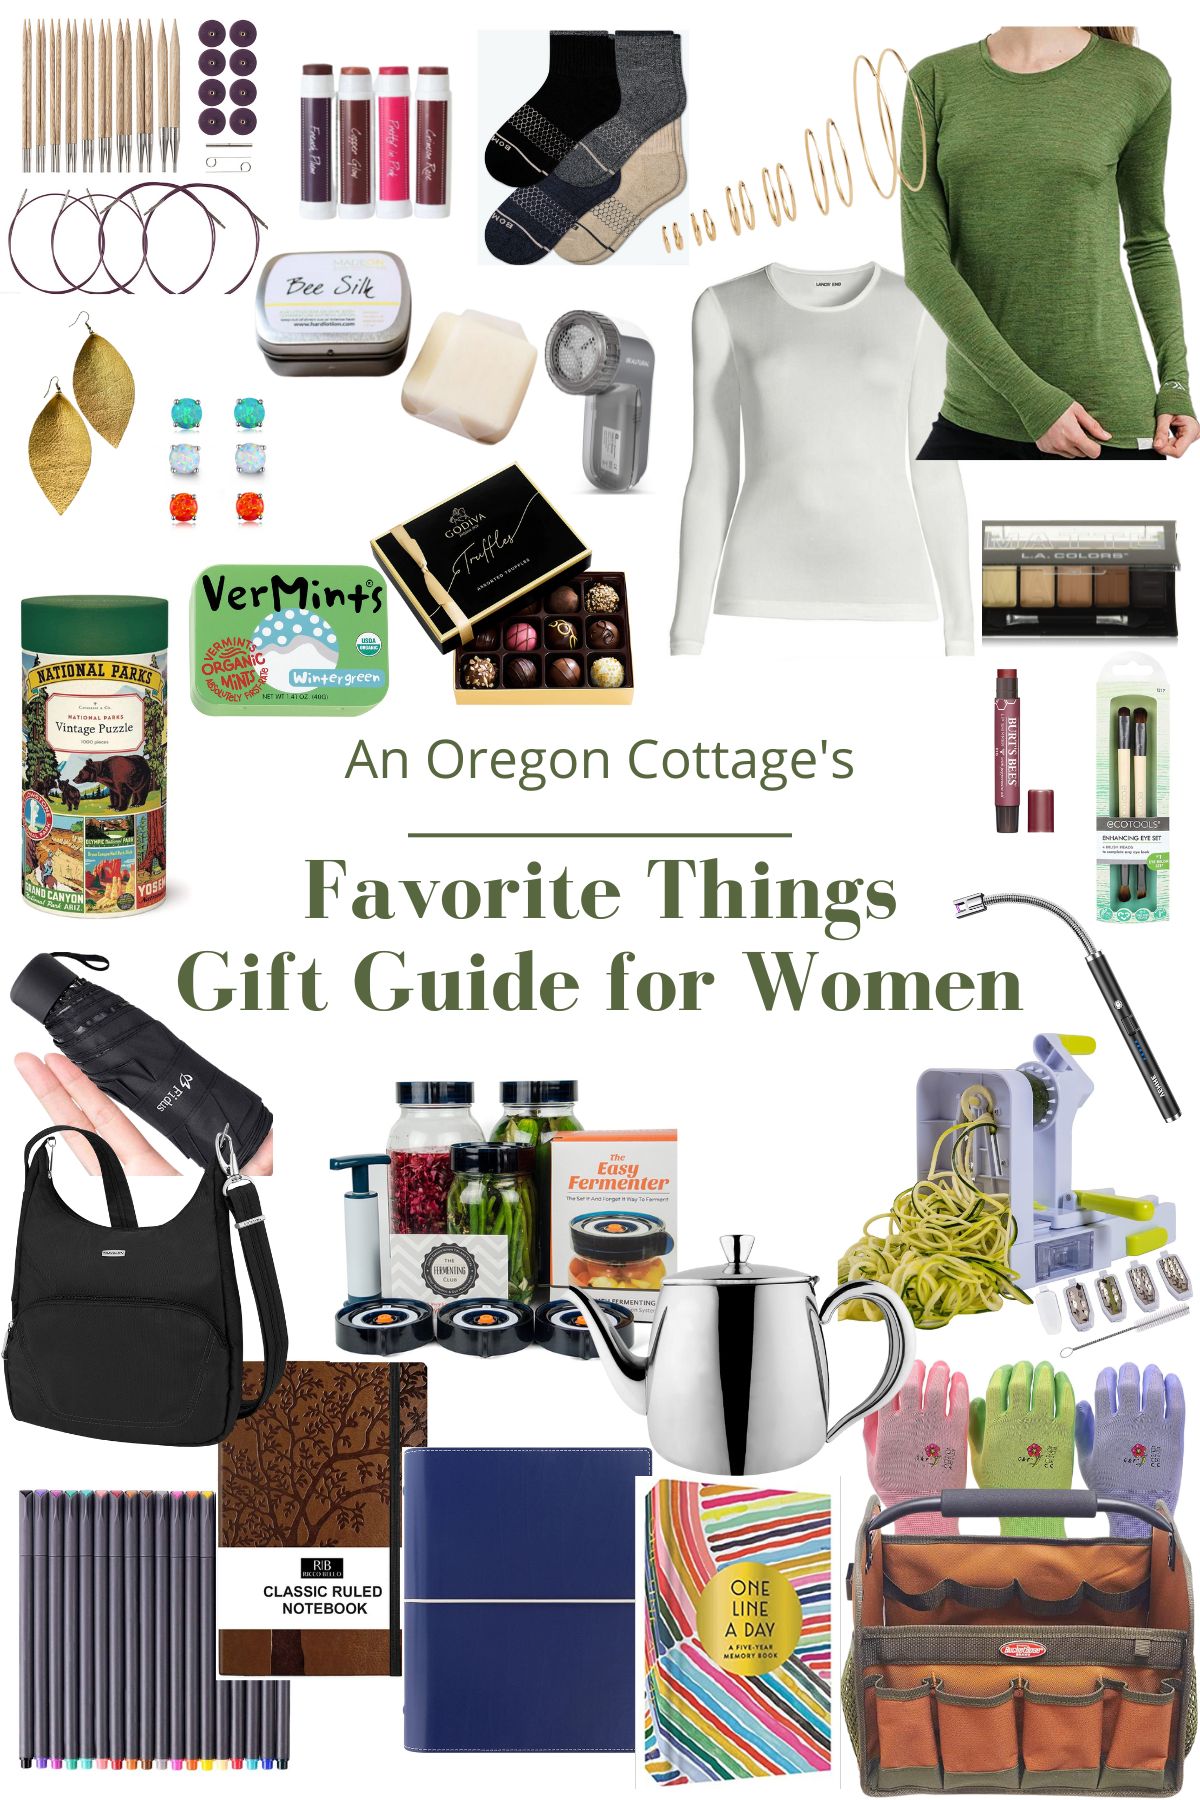 items in gift guide for women